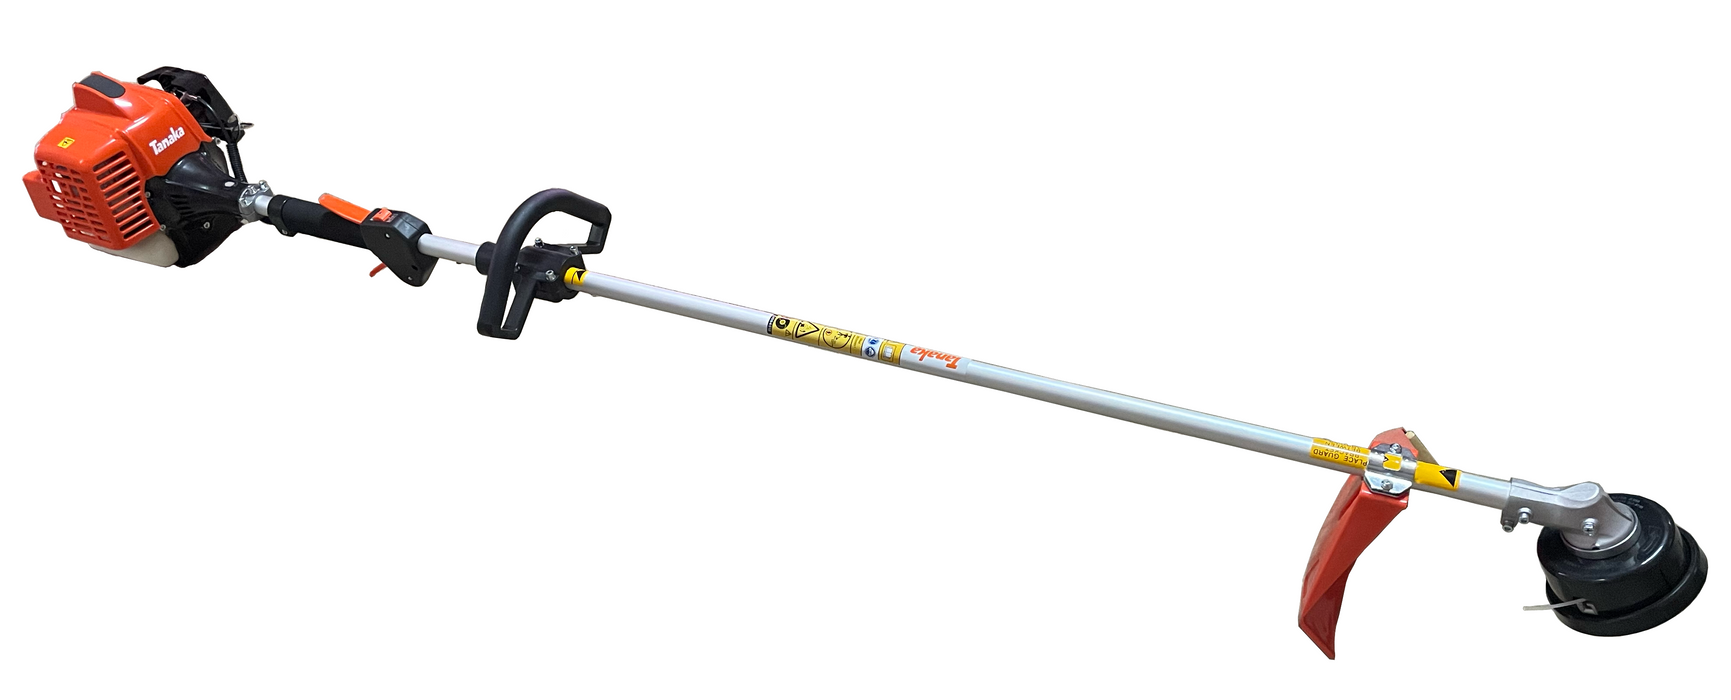 22.5cc 2-Cycle Gas Powered Solid Steel Drive Shaft String Trimmer - TANAKA (TCG23ECPSL)